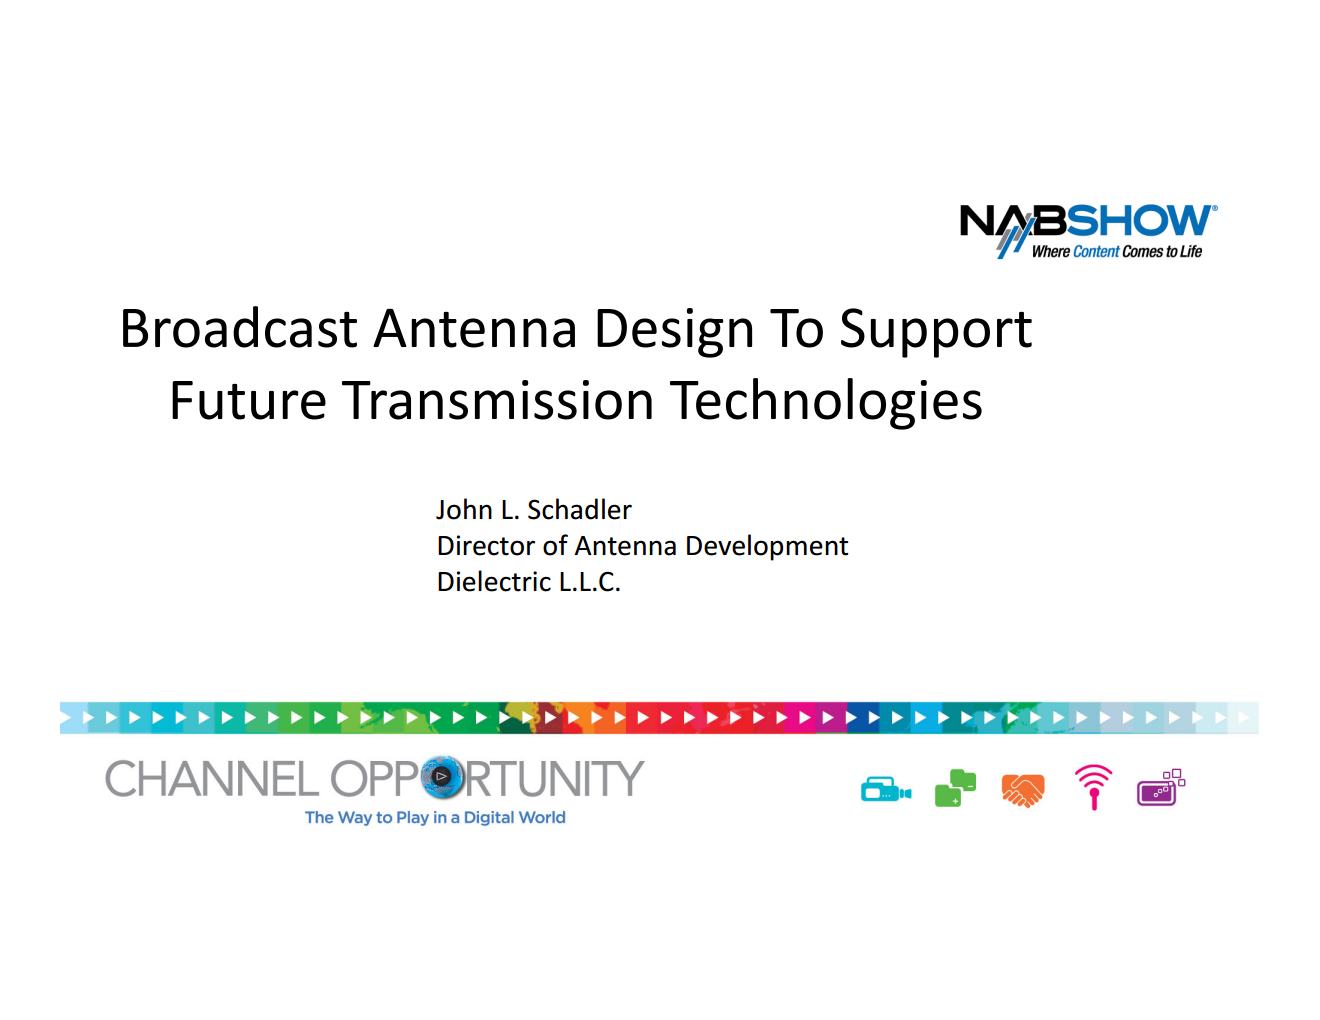 Supporting Future Antenna Technologies